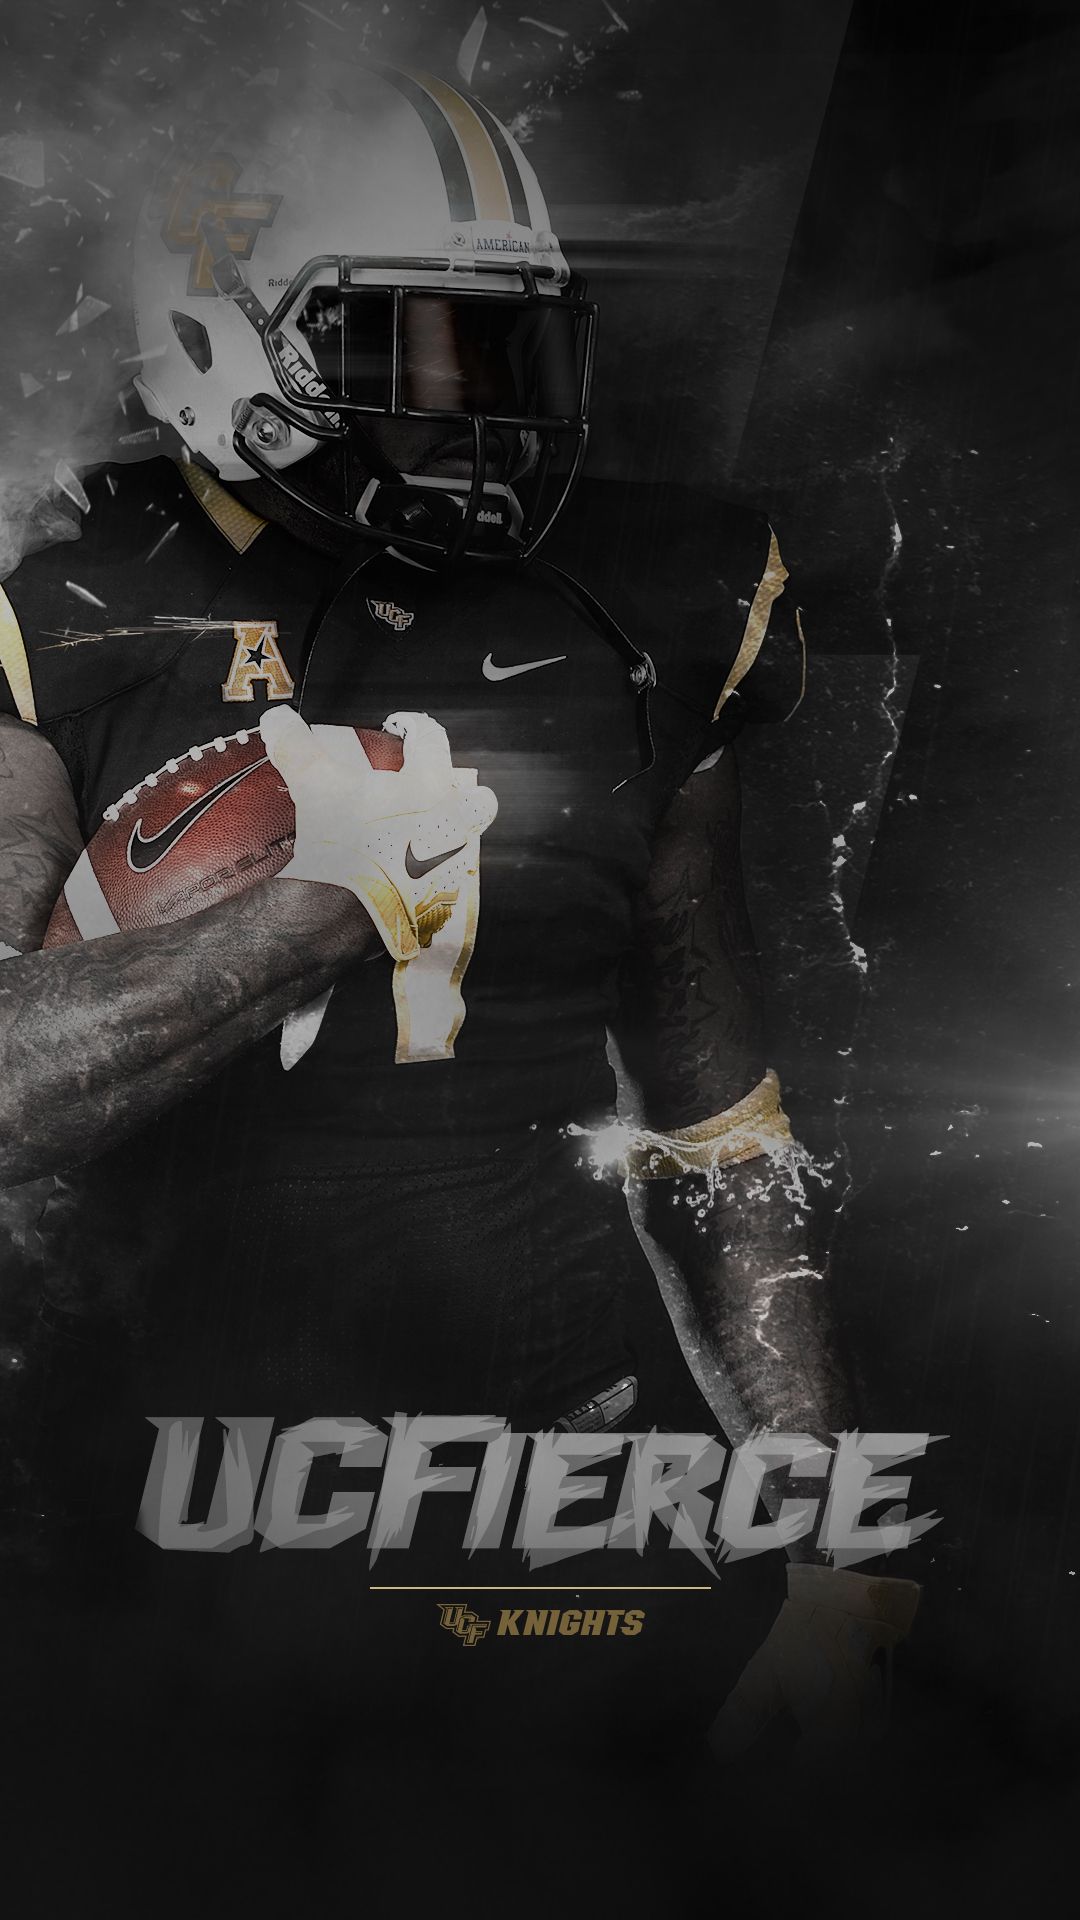 UCF Wallpaper. UCF Wallpaper, UCF Knights Wallpaper and UCF Sports Wallpaper